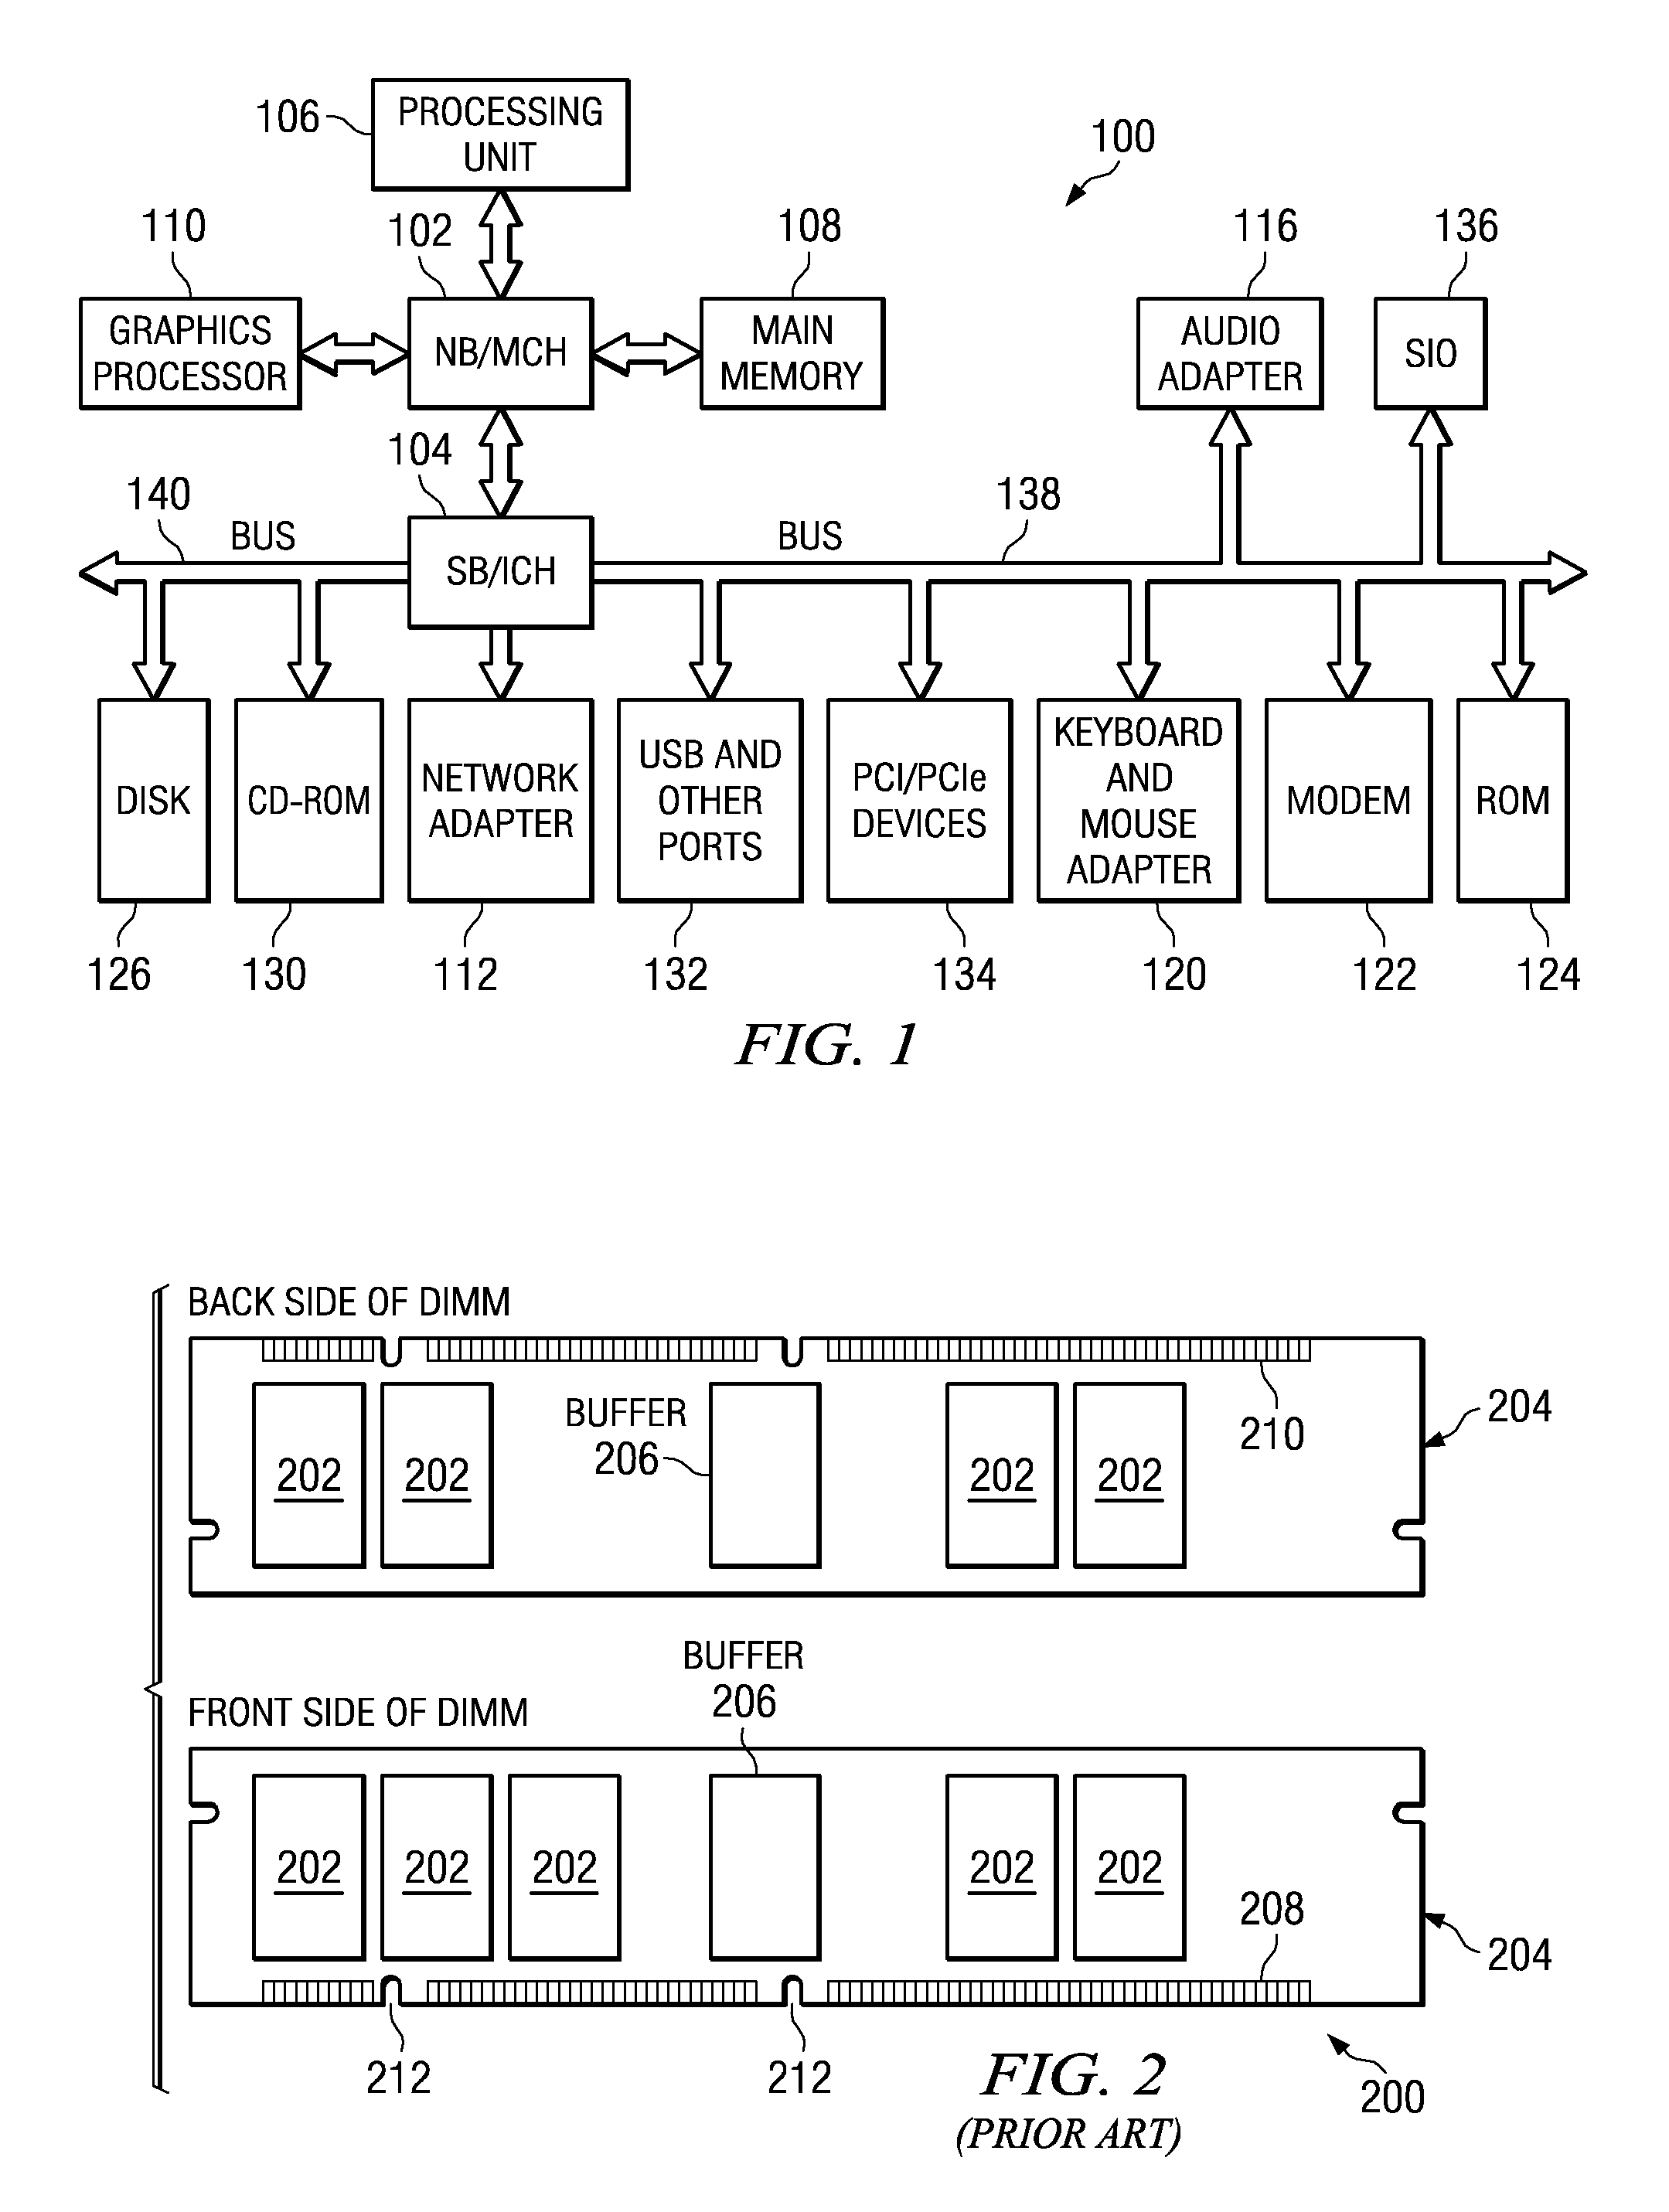 Buffered Memory Module Supporting Two Independent Memory Channels